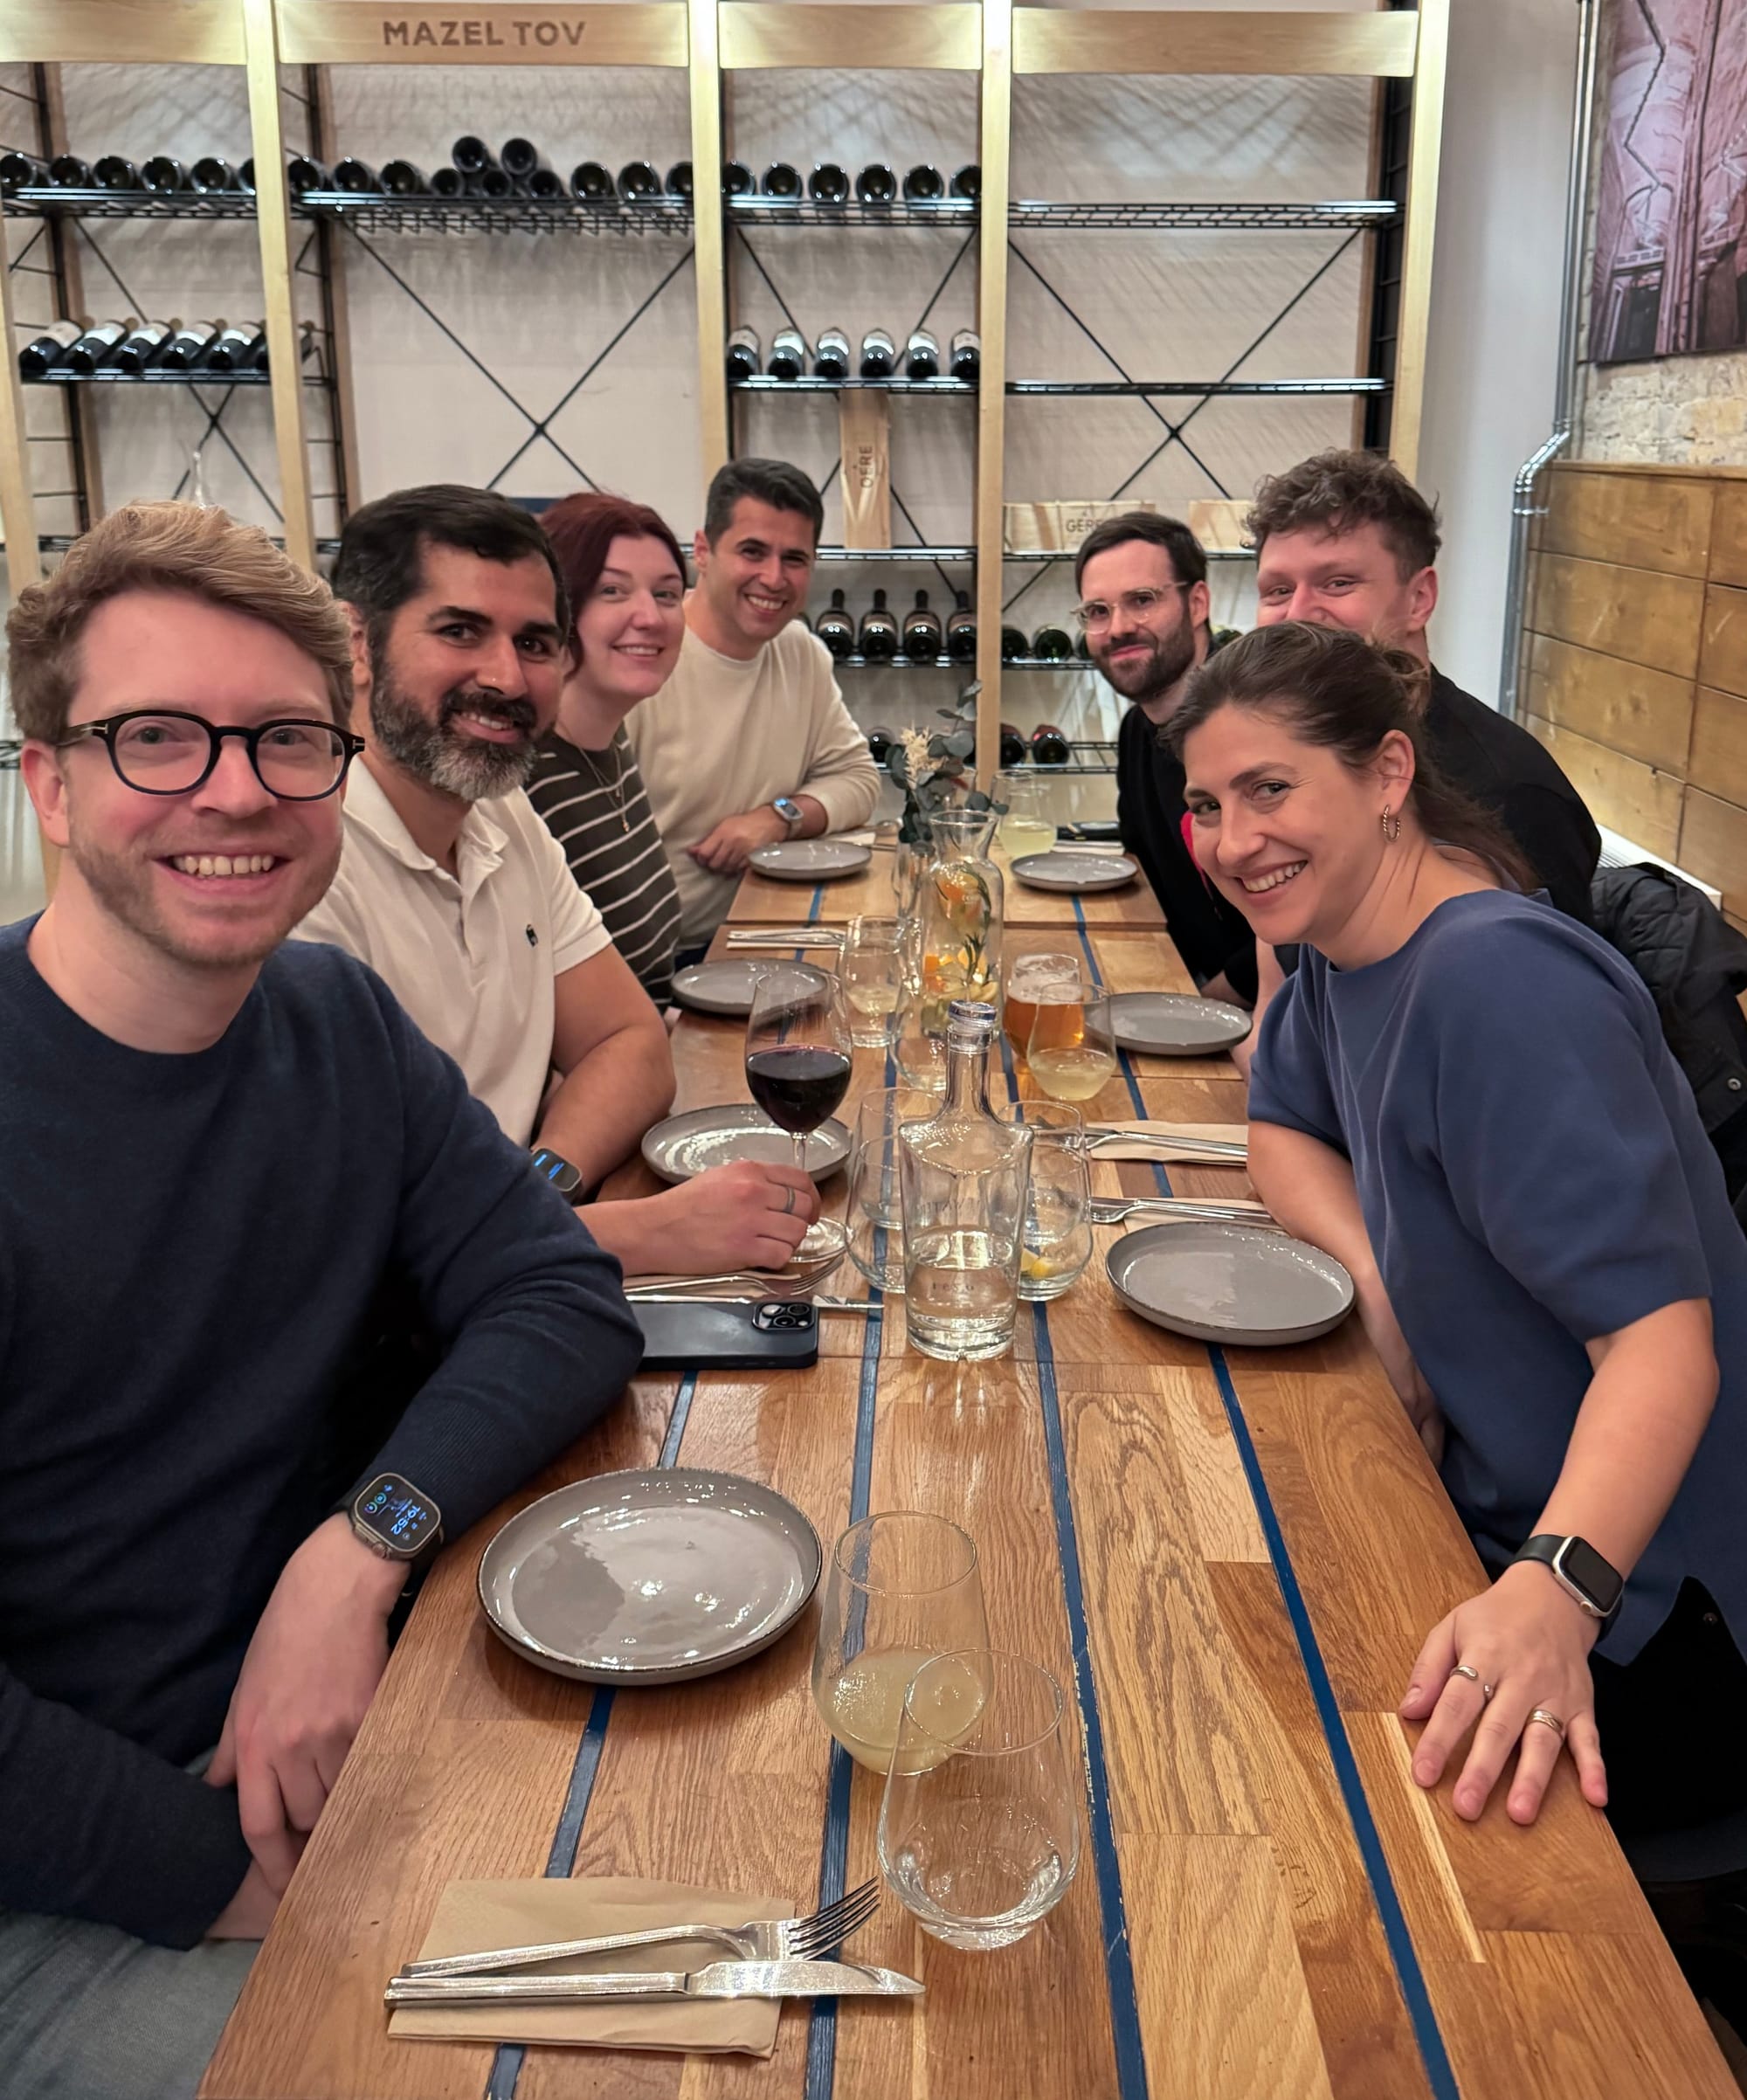 Budapest bound: The power of in-person team retreats in a remote work culture